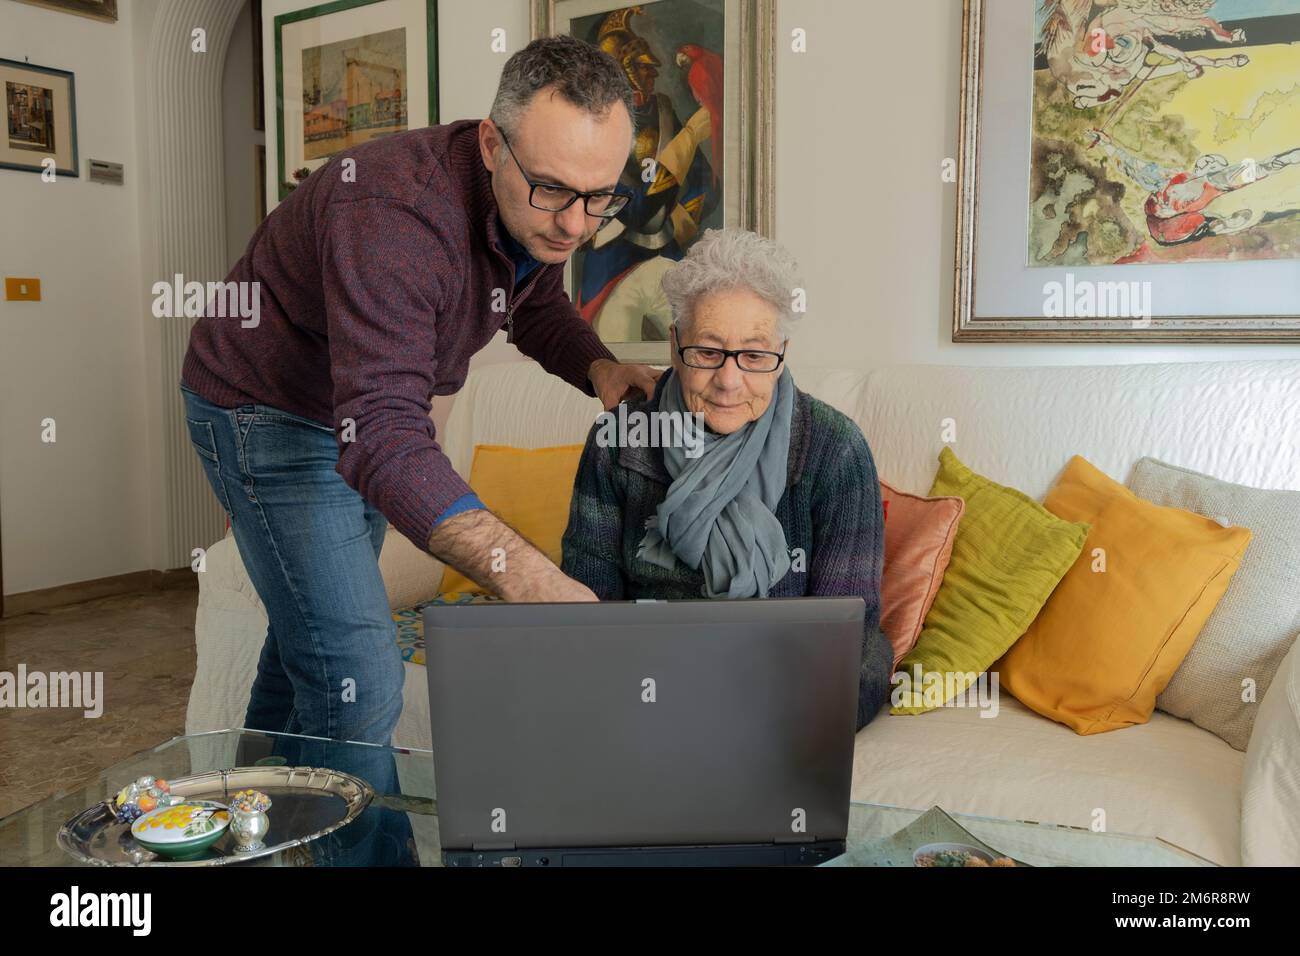 Man helping an old woman with the laptop. Woman sitting on the couch in her living room with a laptop on the table in front of her. Stock Photo